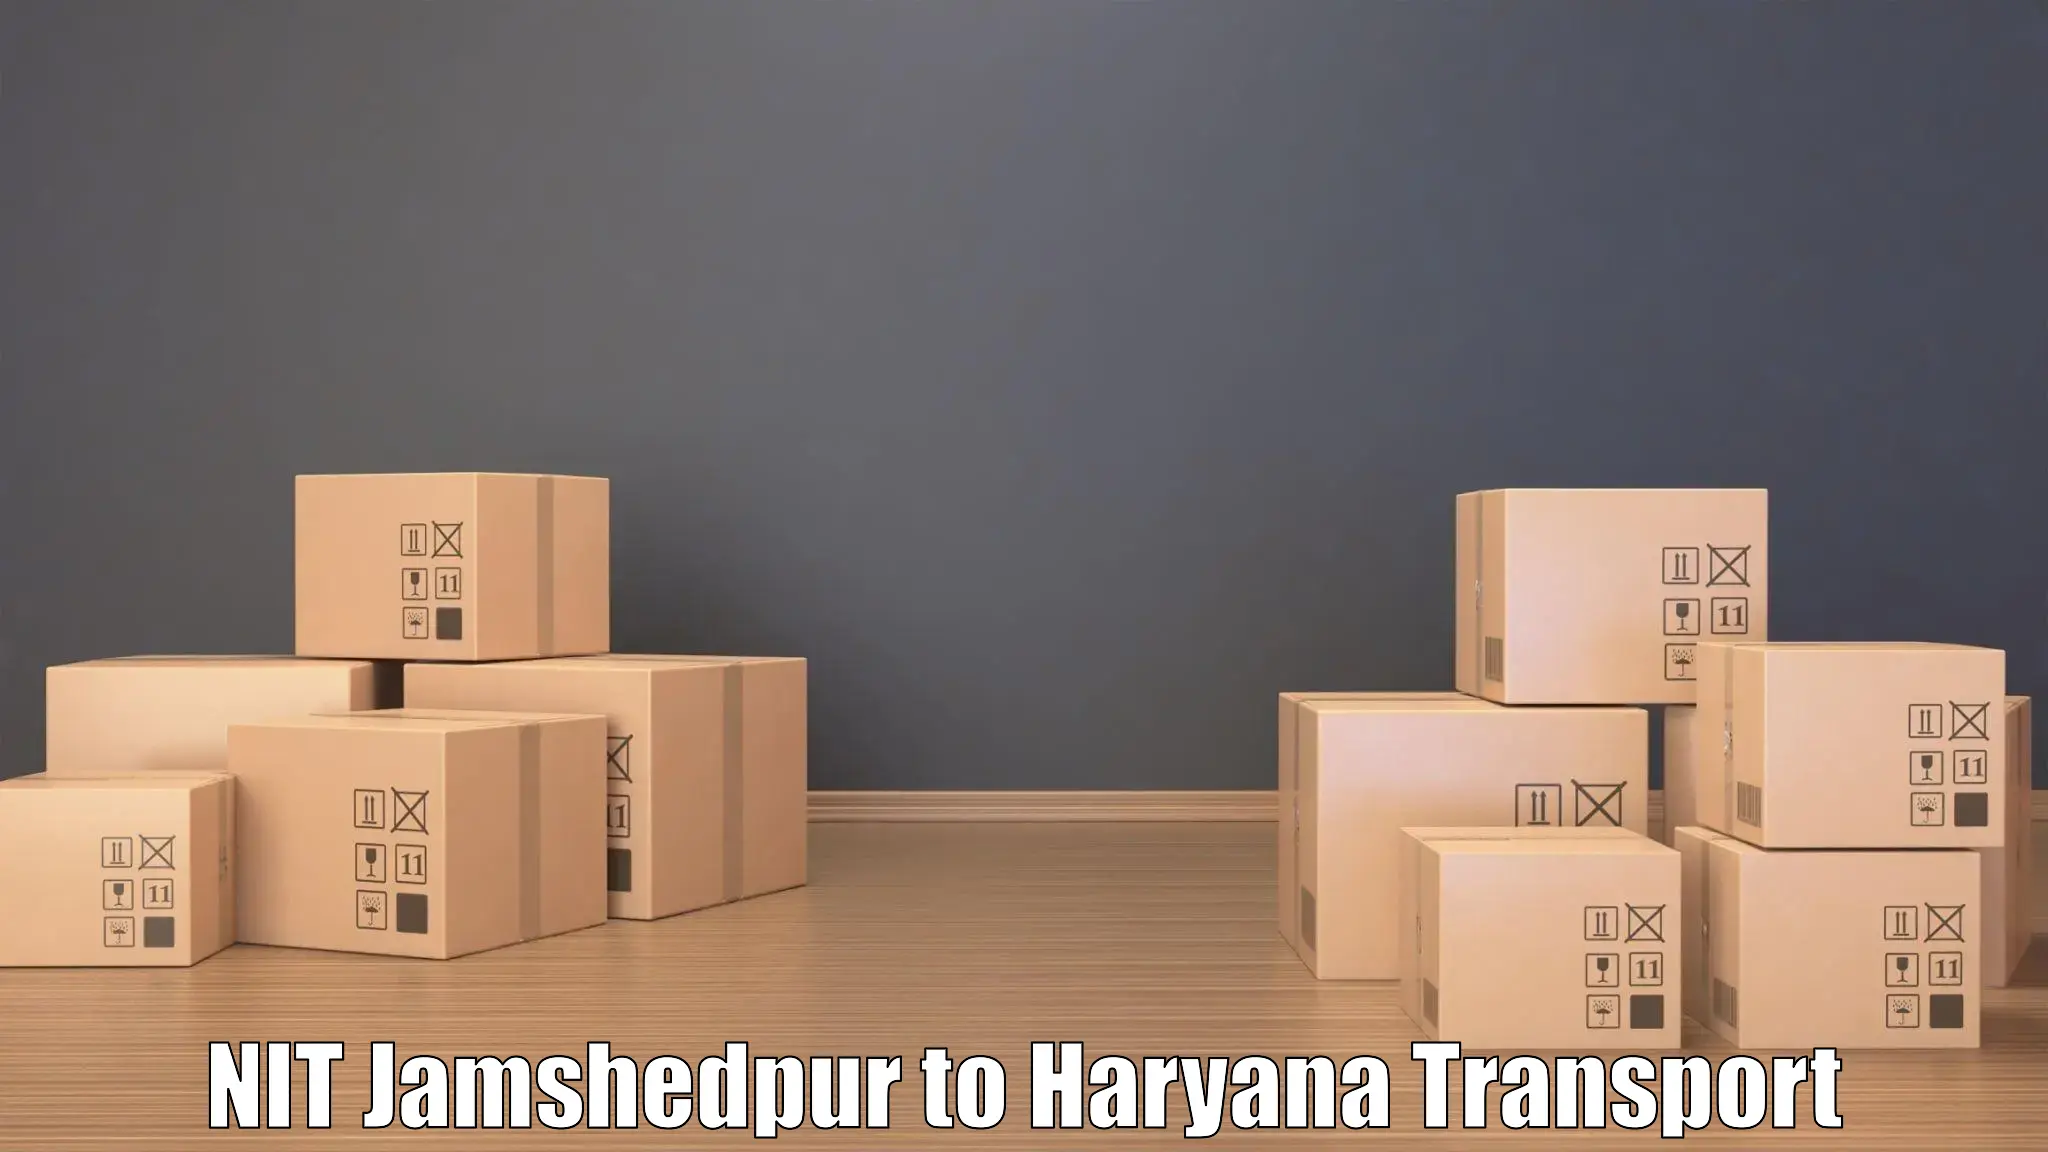 Container transport service NIT Jamshedpur to Siwani